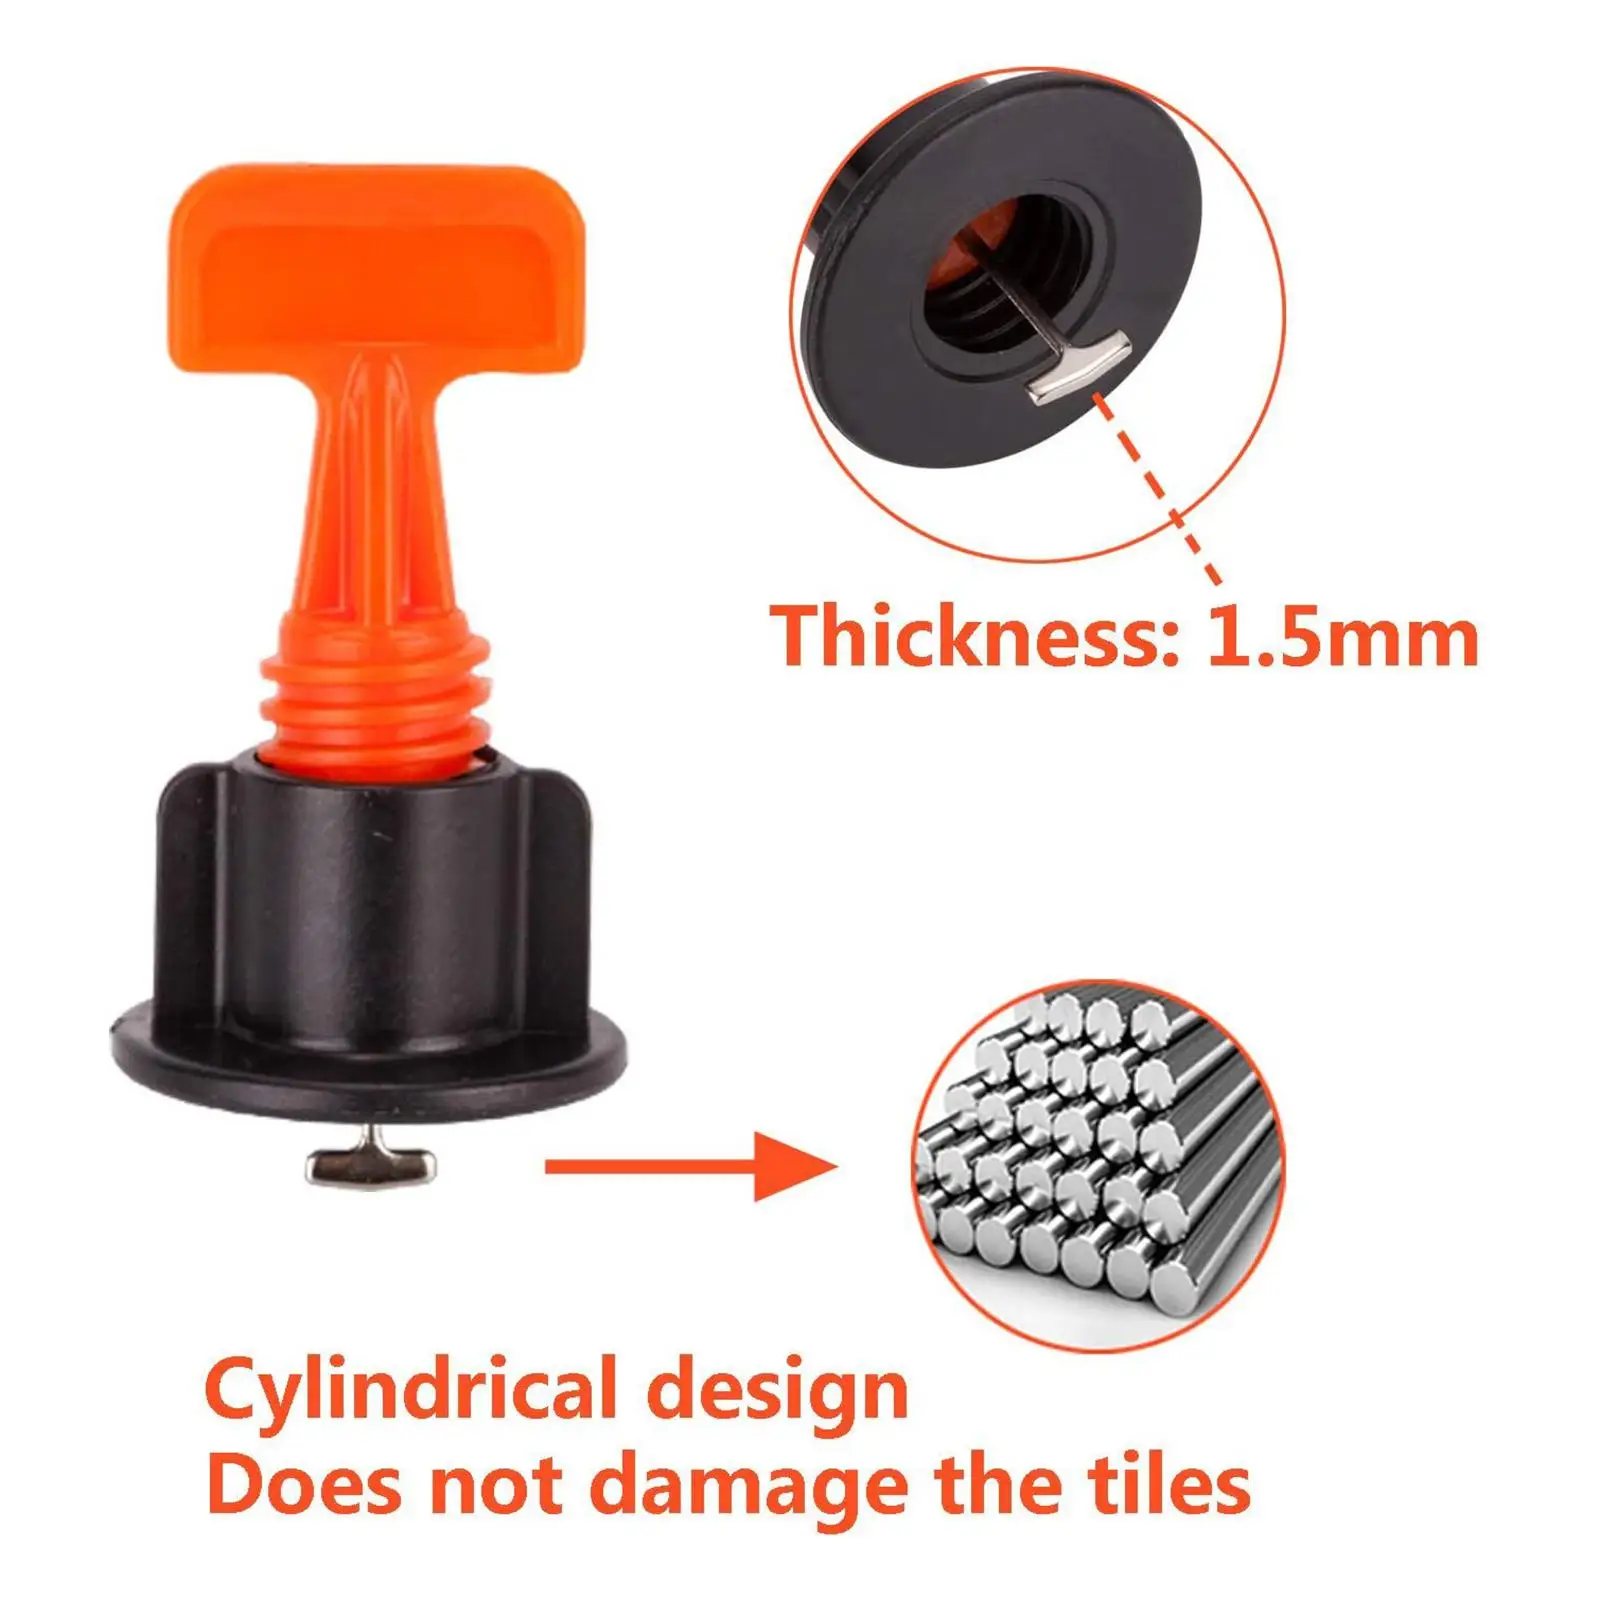 151x Reusable Level Wedges Tile Spacers 2.0 mm Tile Spacer Ceramic Tile Installation Tool with Wrenches for Floor Building Wall